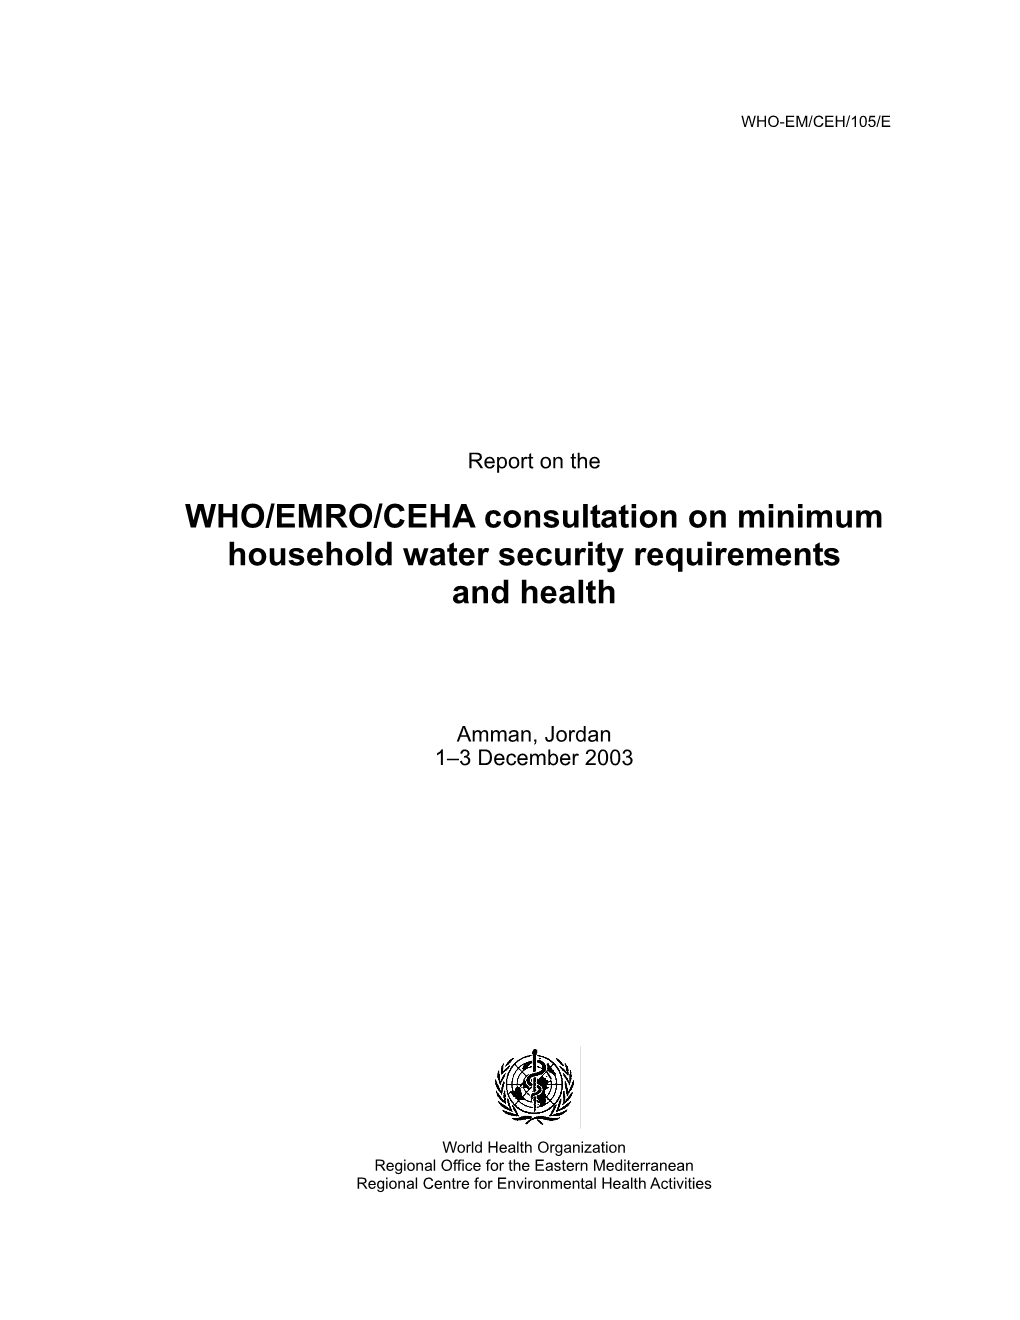 WHO/EMRO/CEHA Consultation on Minimum Household Water Security Requirements and Health